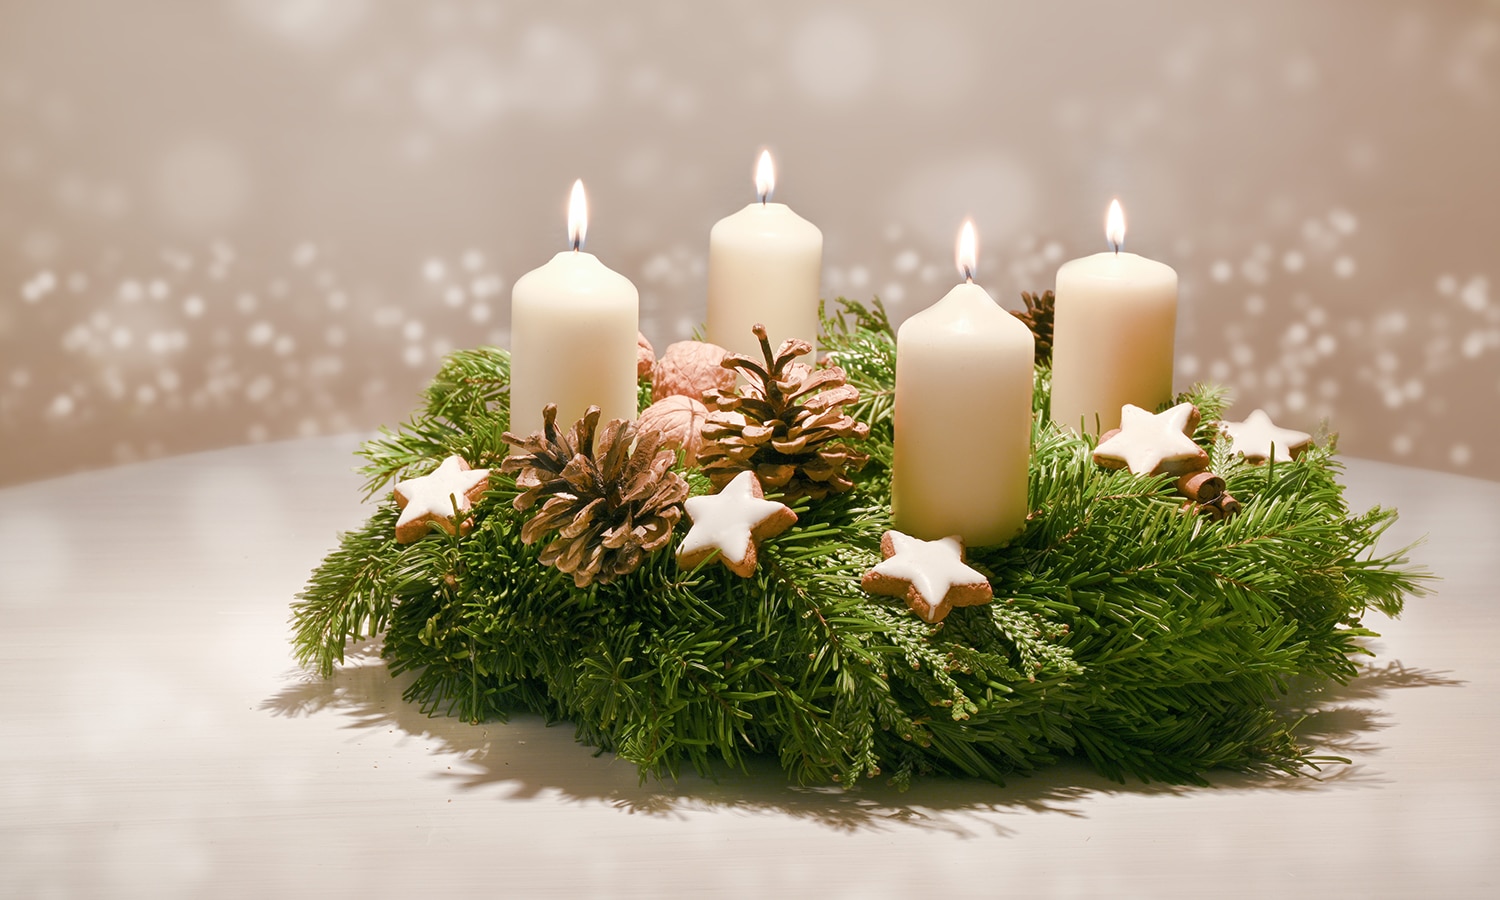 Celebrate Advent: 4 Weeks of Welcoming Jesus! | Navigators Bible Study Resource | Third Advent - decorated Advent wreath from fir and evergreen branches with white burning candles, tradition in the time before Christmas, warm background with festive bokeh and copy space